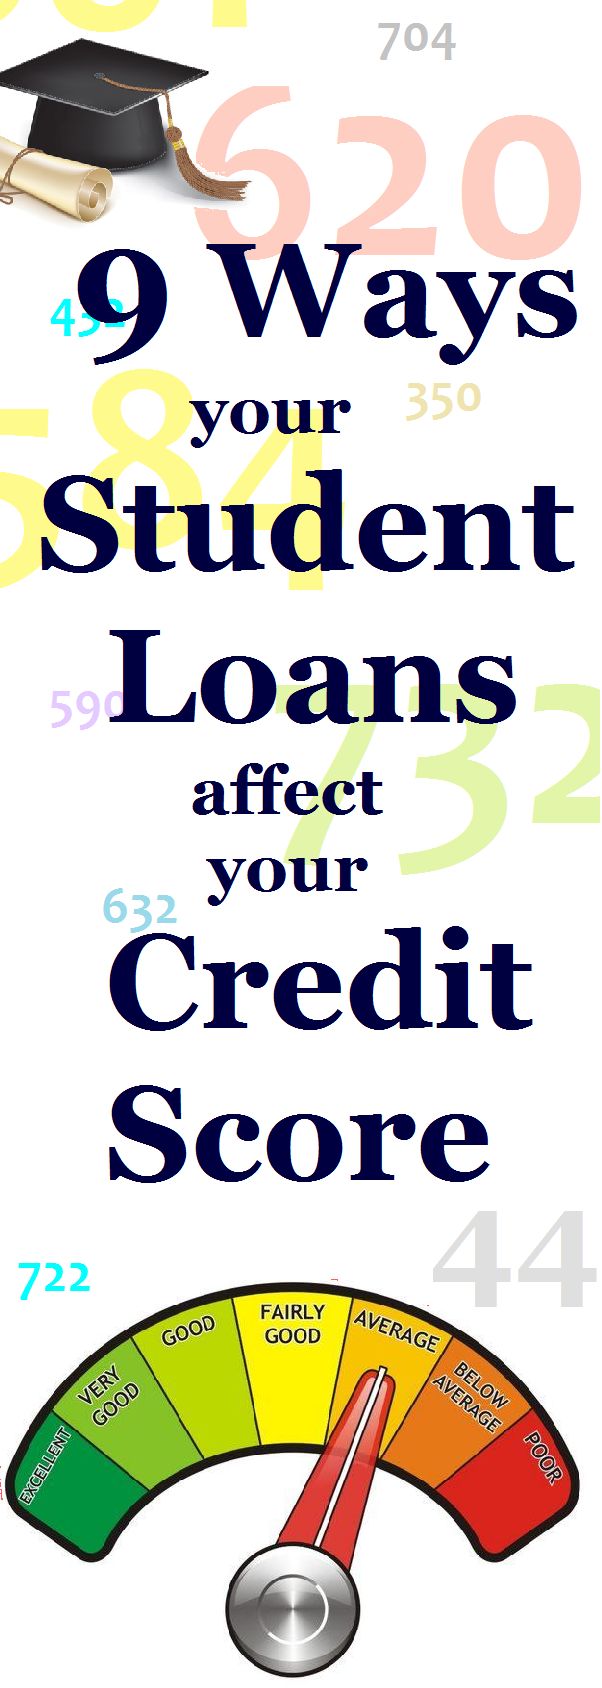 9 ways student loans impact your credit score infographic